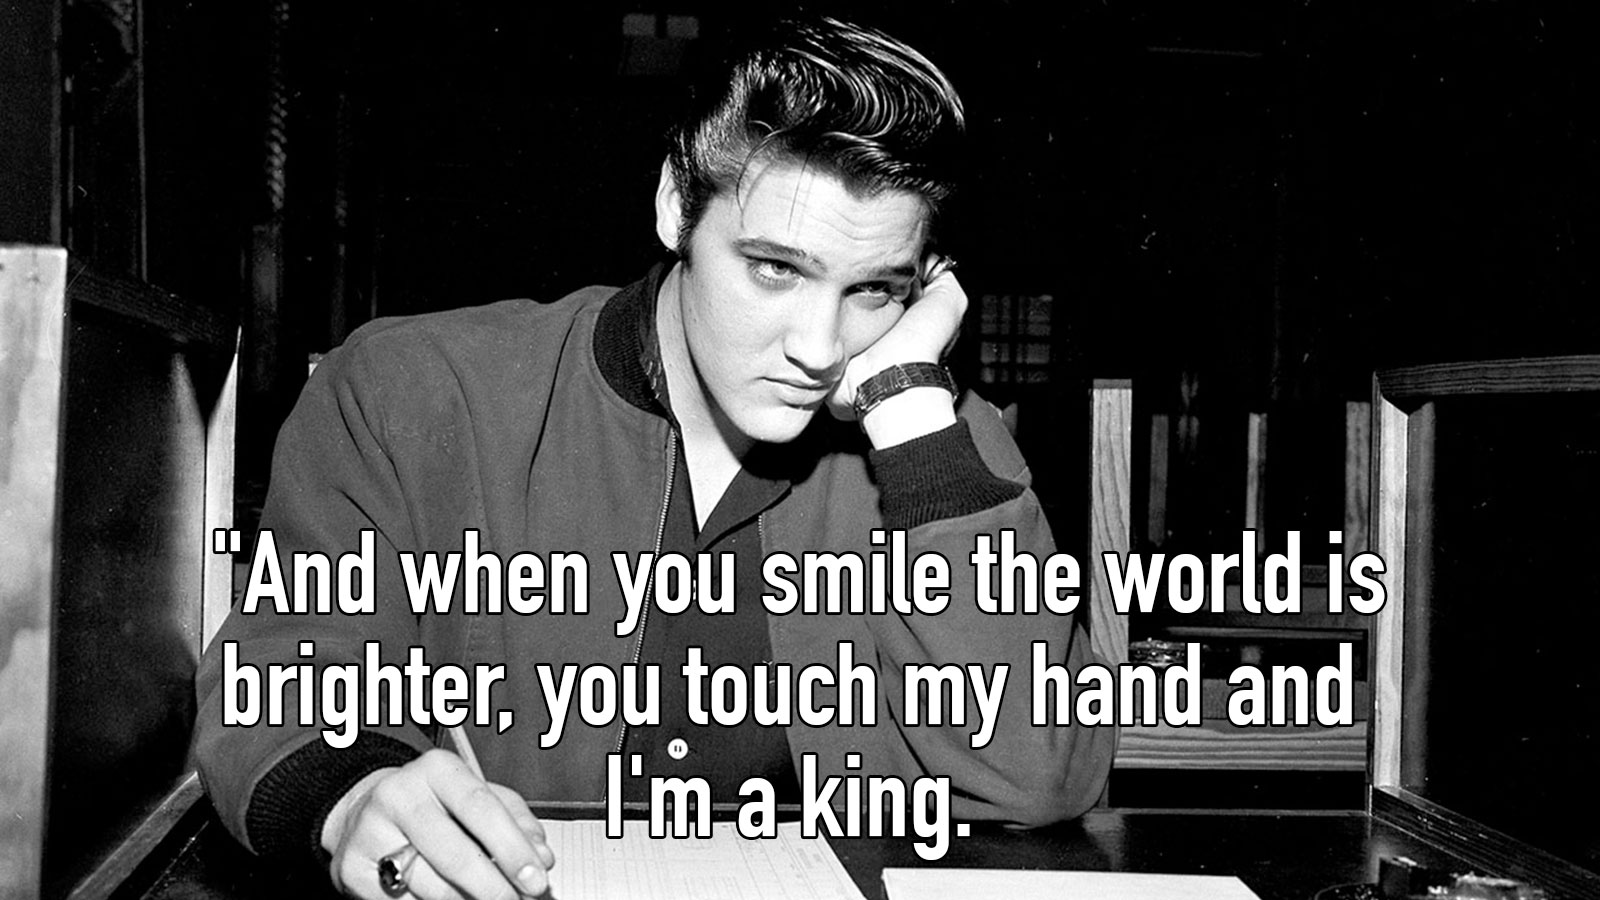 Can You Guess Which Elvis Presley Song This Lyric Is From? 71